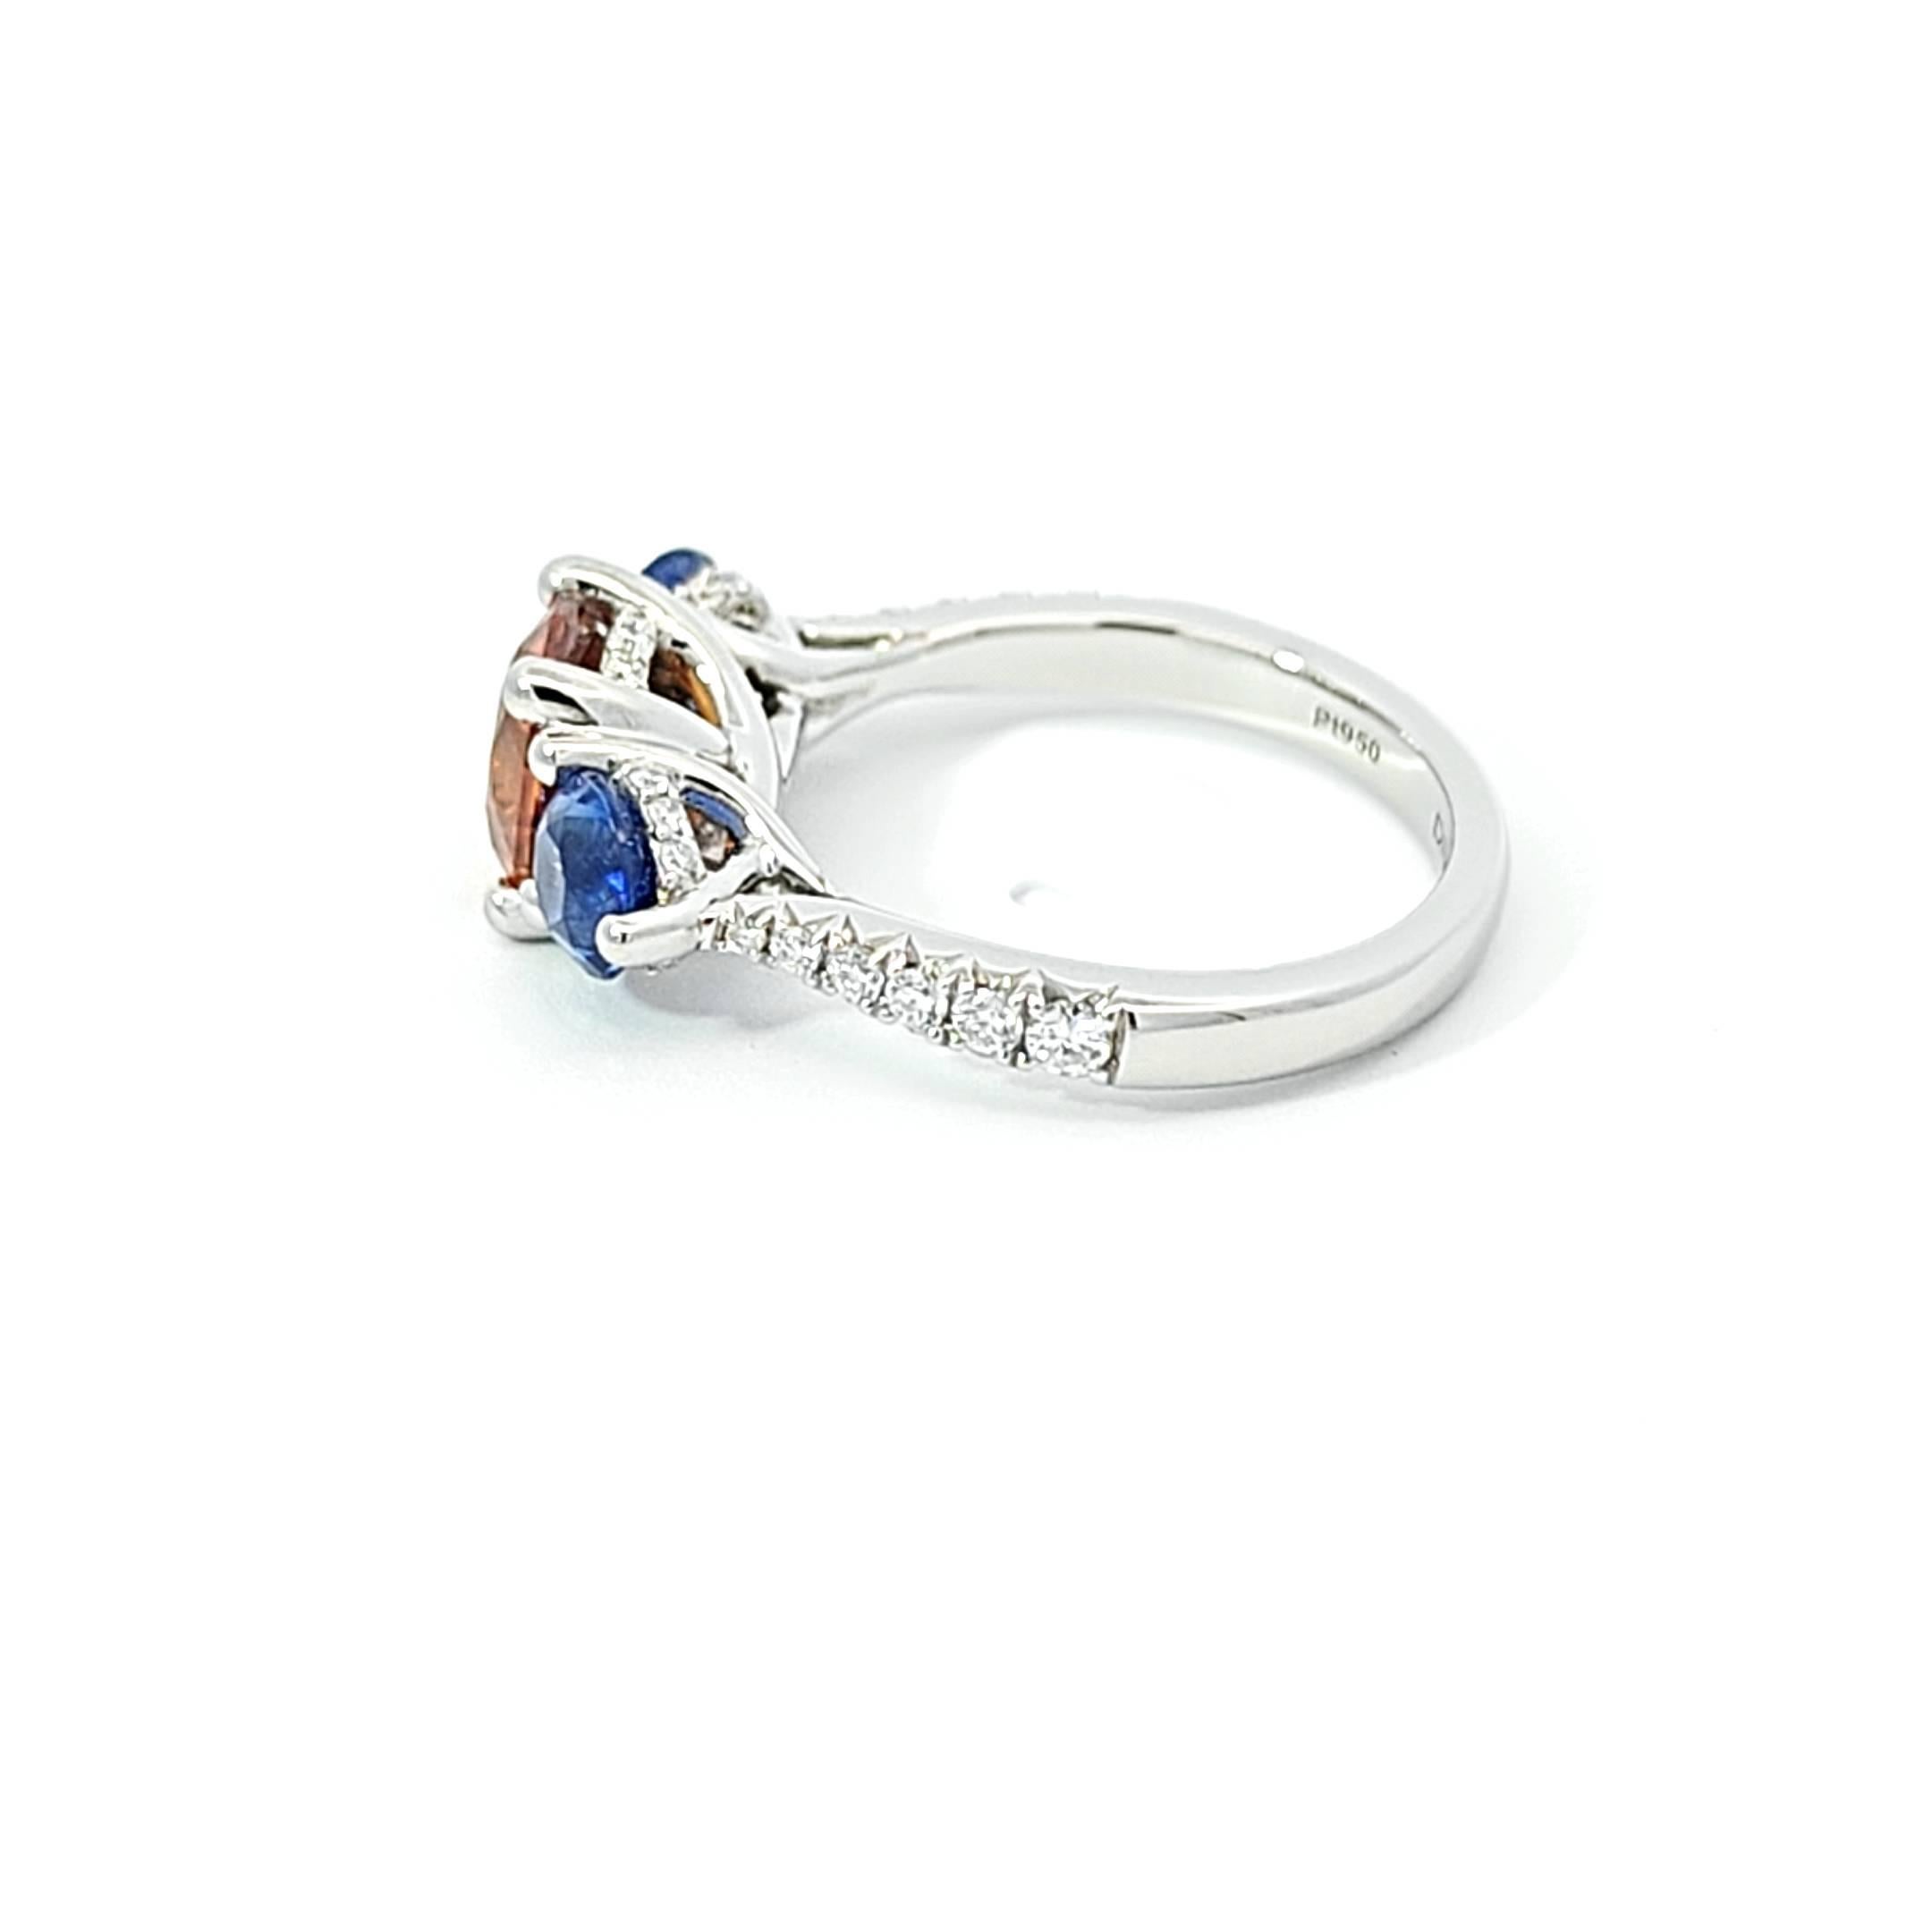 This exquisite platinum ring celebrates a kaleidoscope of colors with its vibrant gemstone centerpiece, featuring a fiery orange zircon nestled between two rich blue sapphires. Crafted to maximize visual drama, these gems appear to float within a